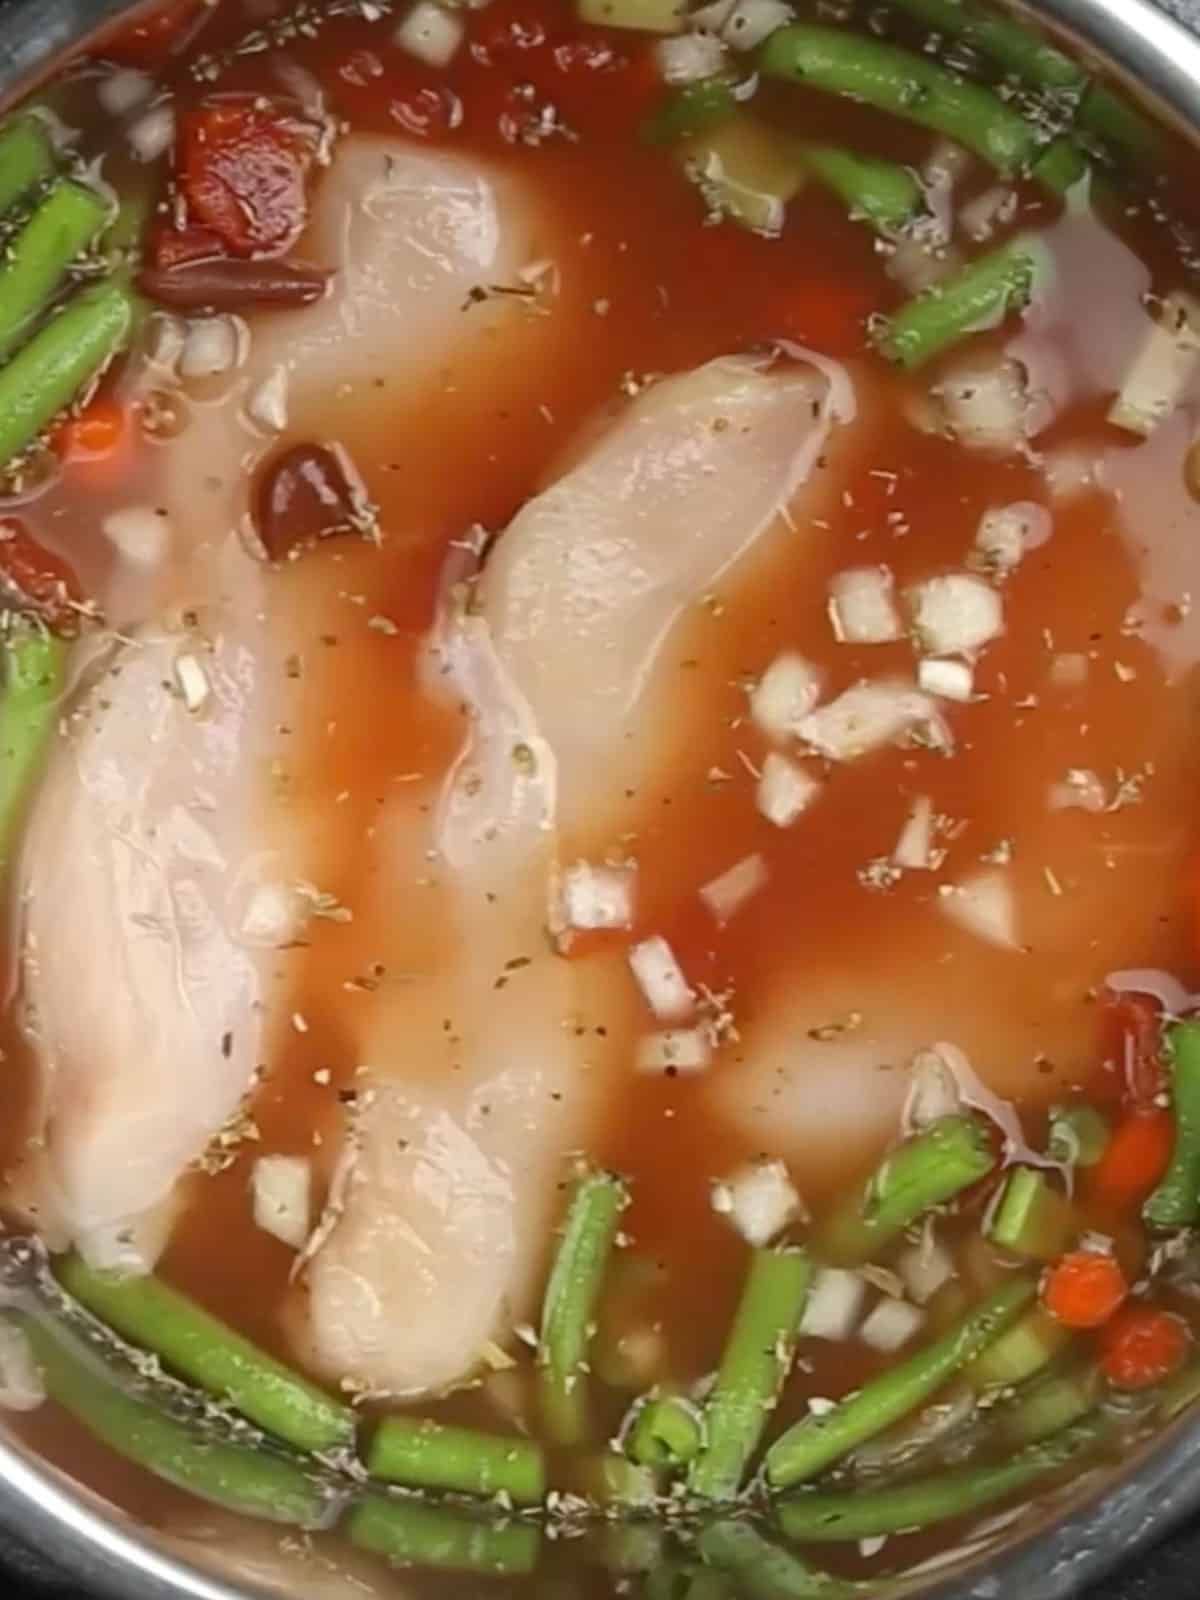 Raw chicken pieces added to the instant pot the the rest of the soup ingredients.